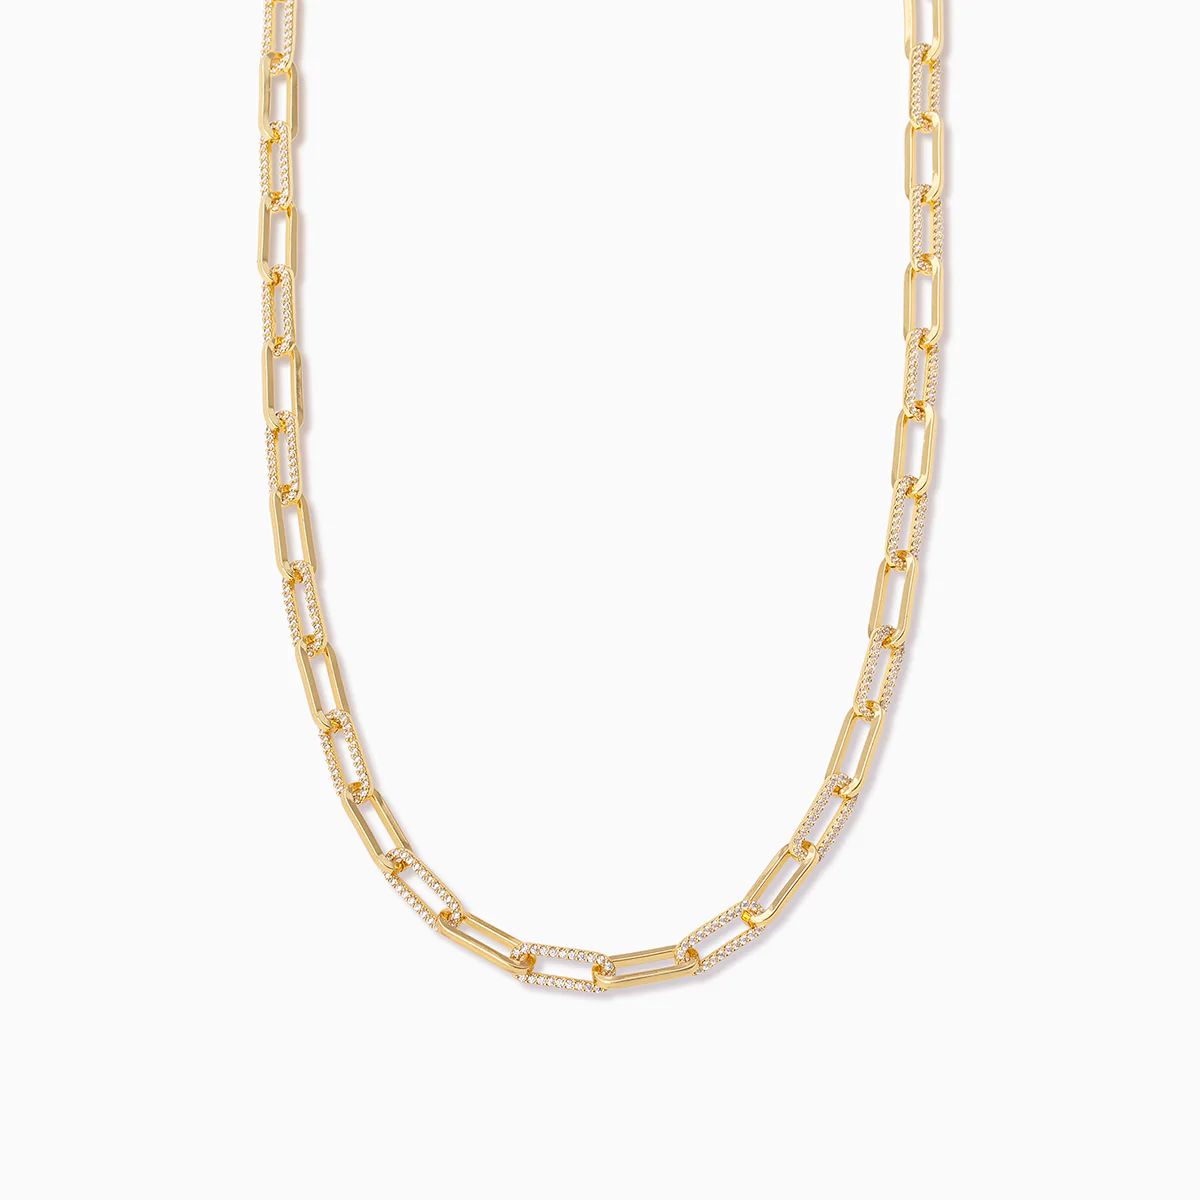 Flashing Lights Chain Necklace | Uncommon James